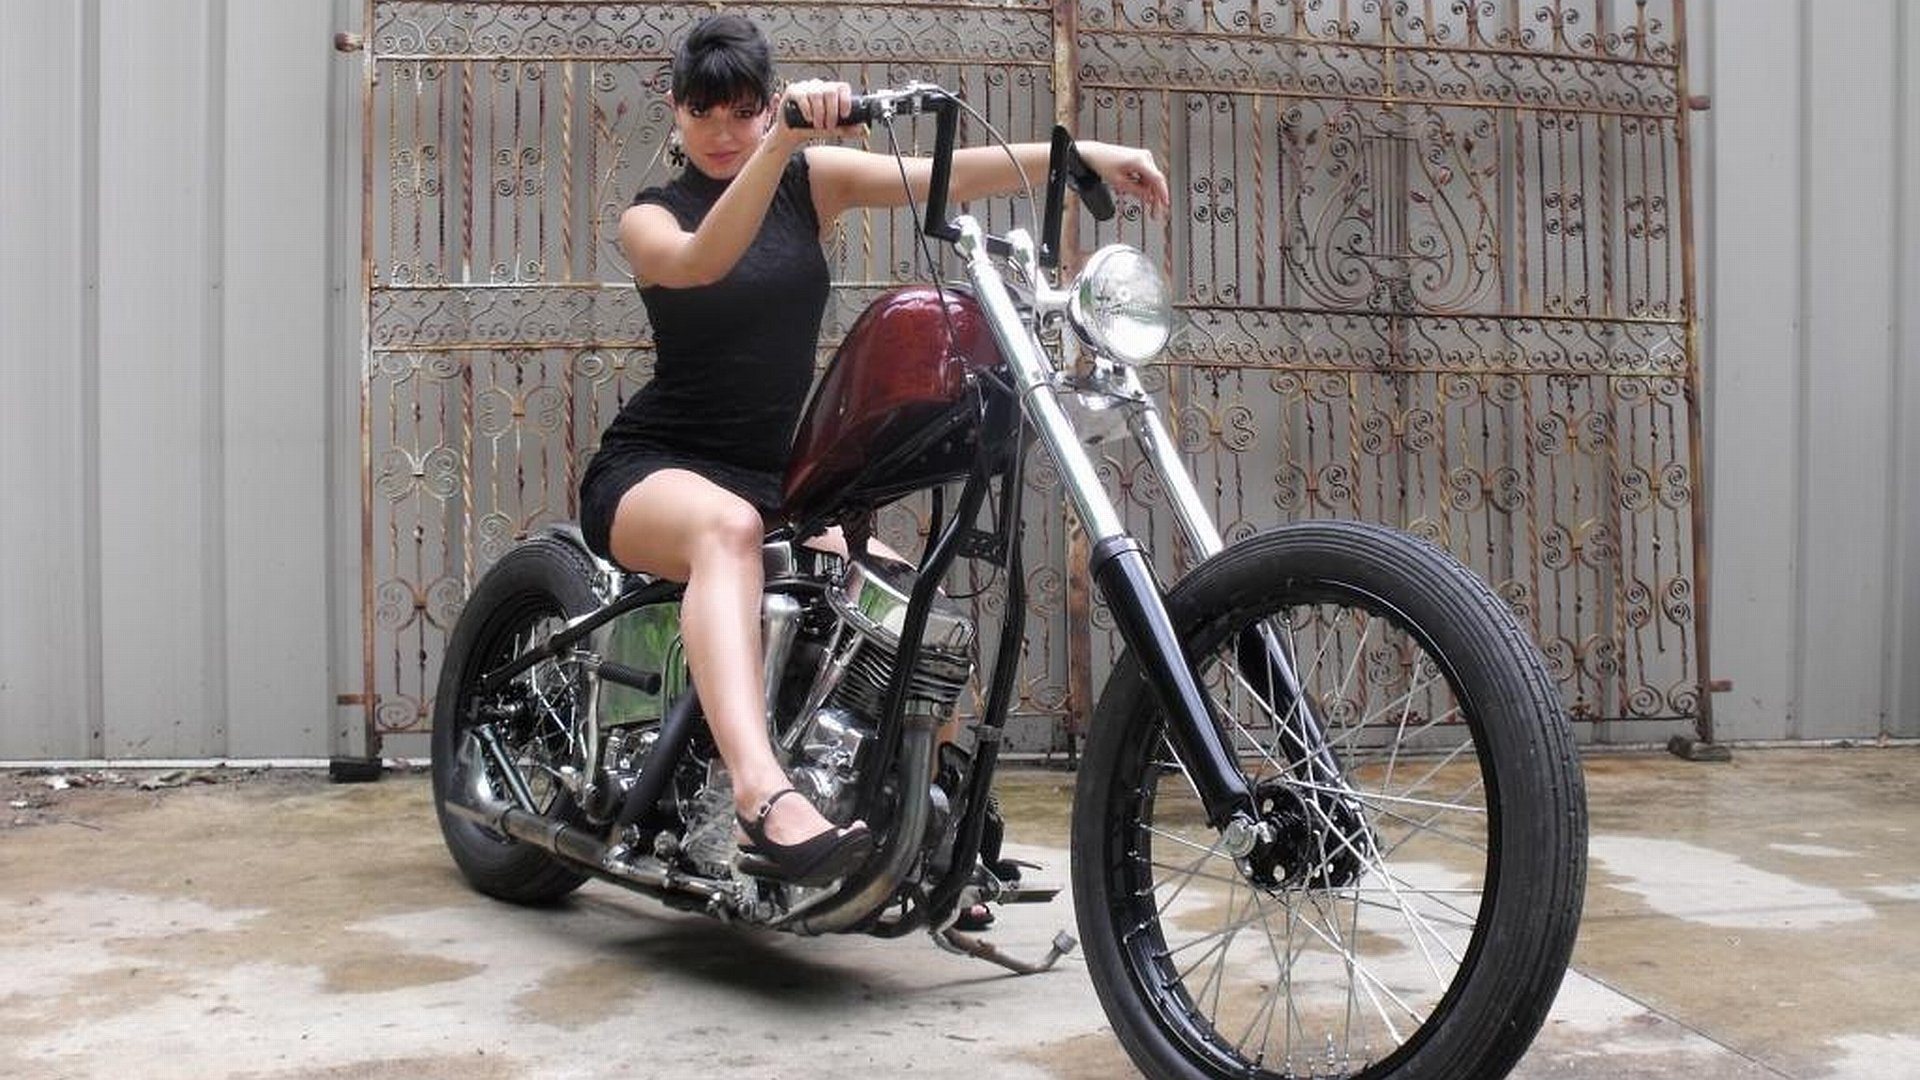 Babes and Motorcycle hd and wide wallpapers ~ Mylikescool